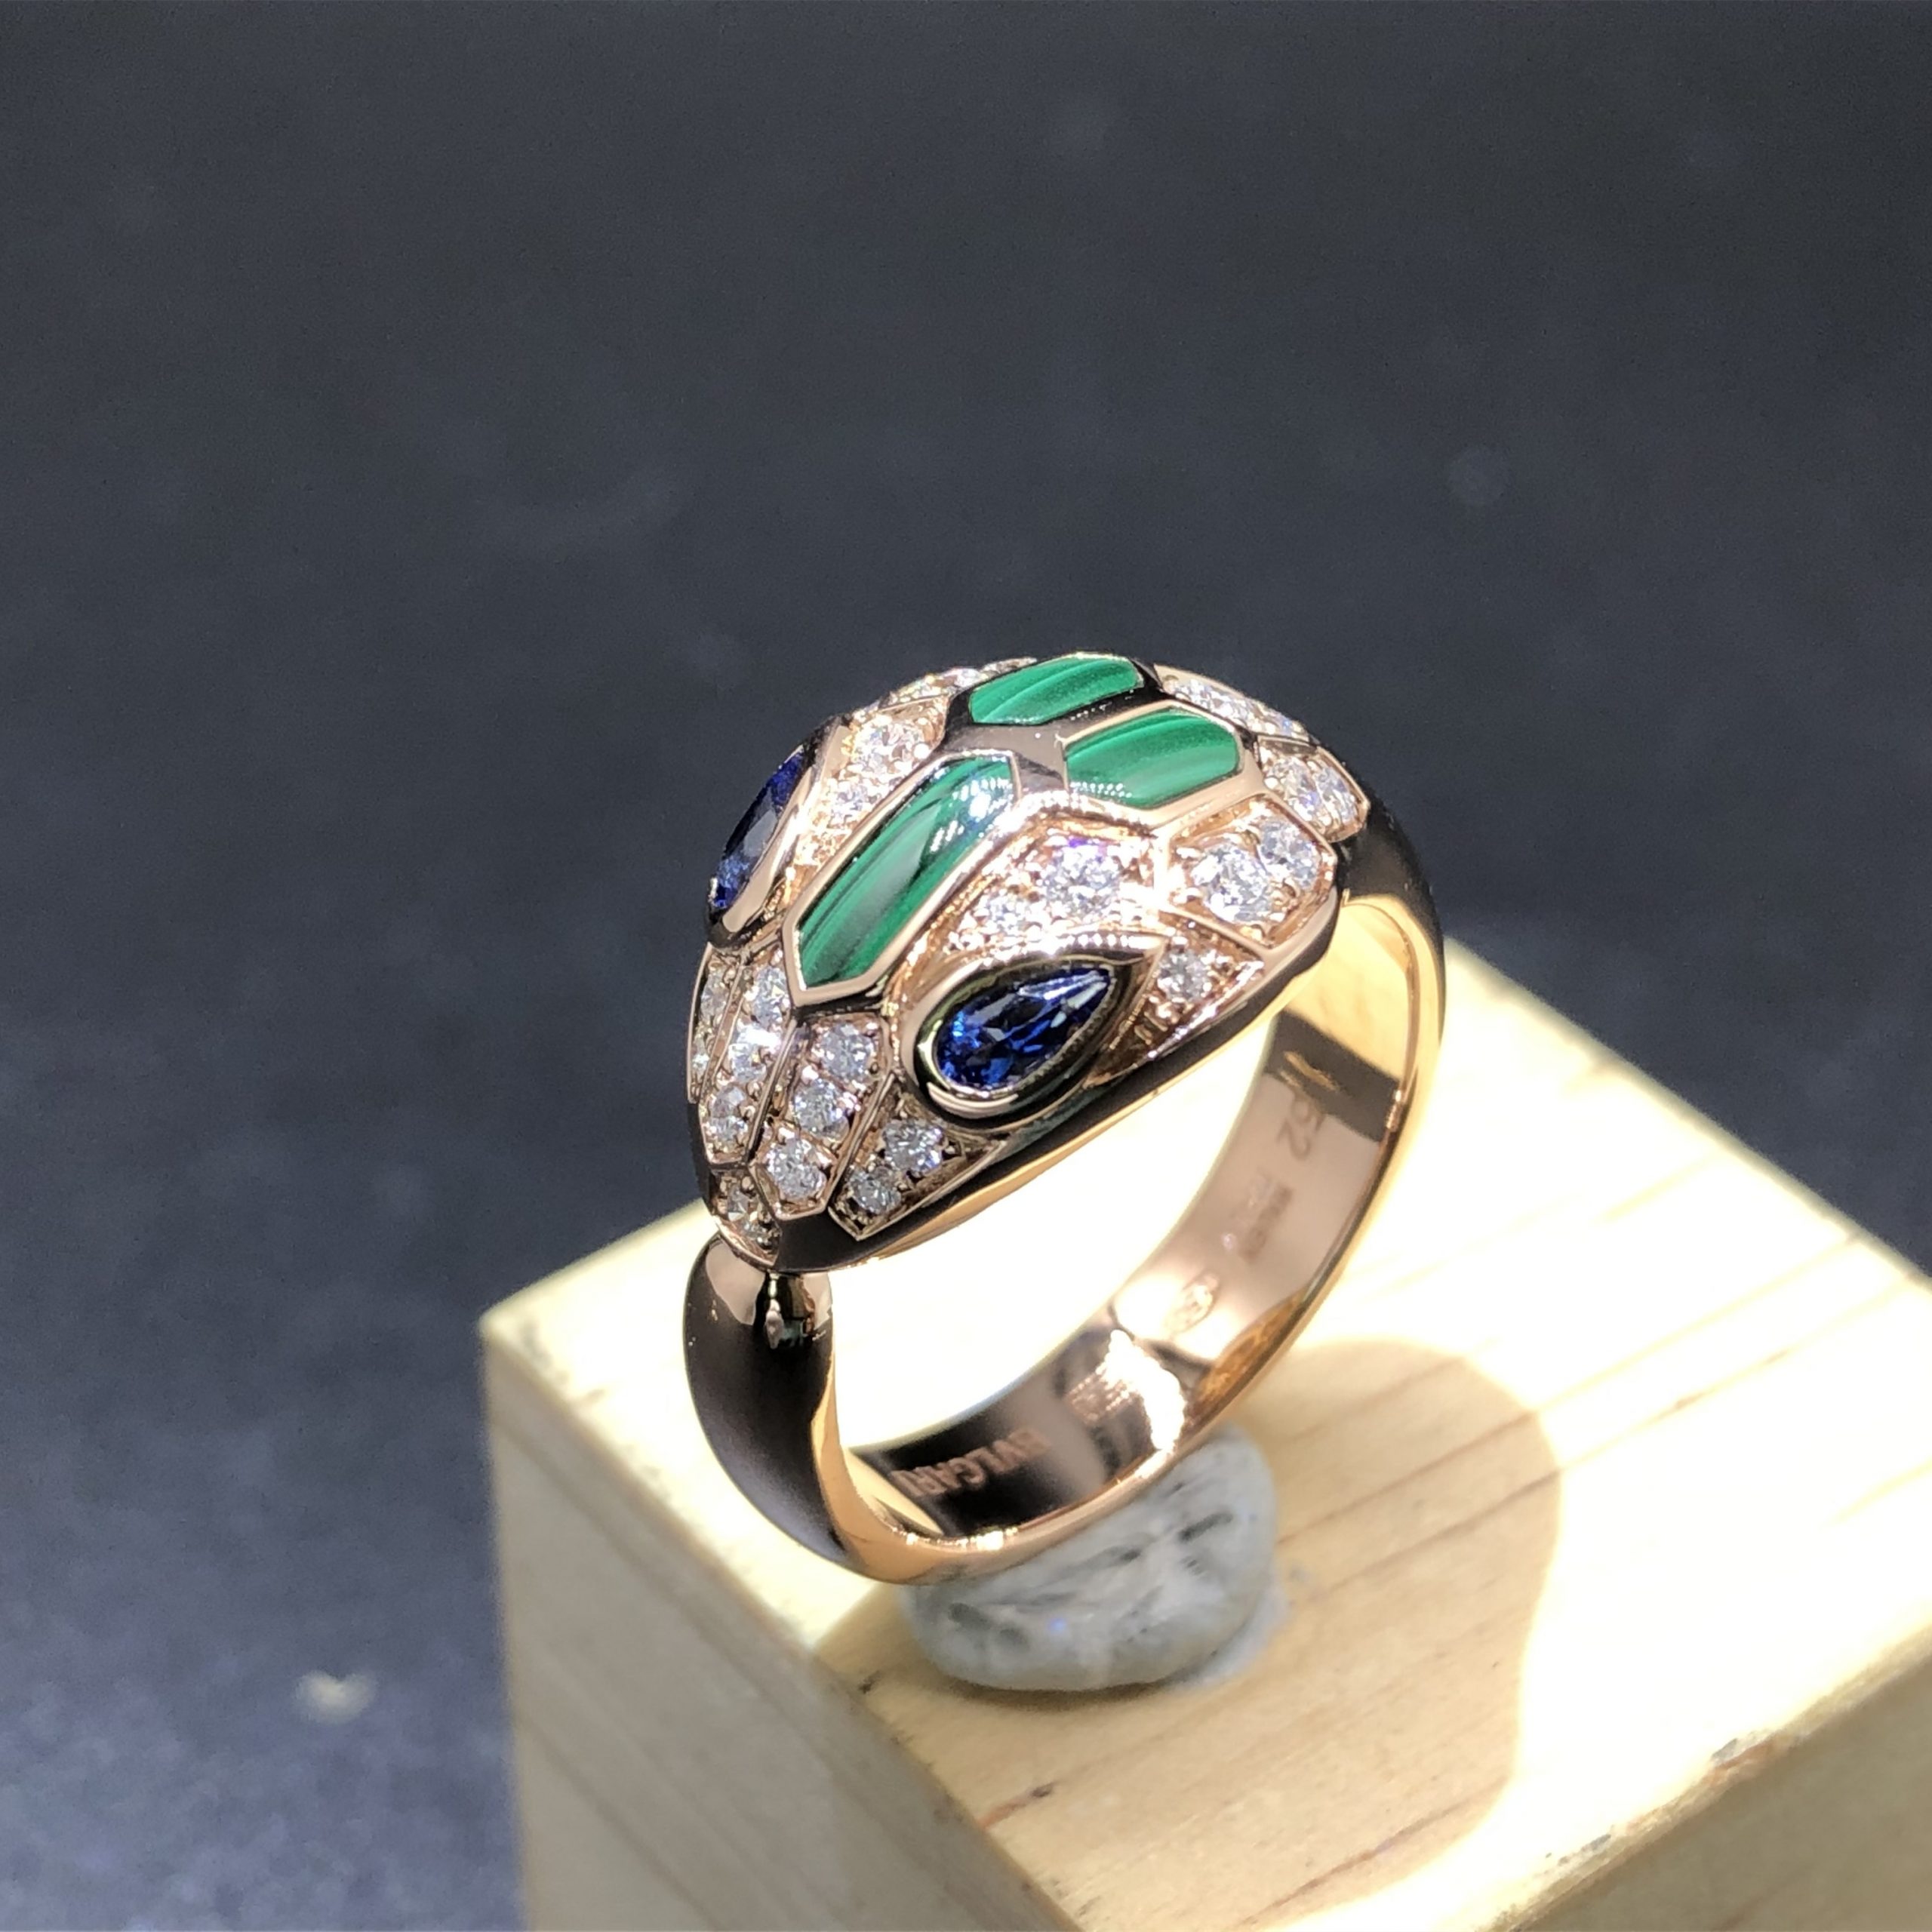 Bvlgari Serpenti Ring Custom Made in 18Kt Rose Gold with Blue Sapphire Eyes,Malachite and pavé Diamonds